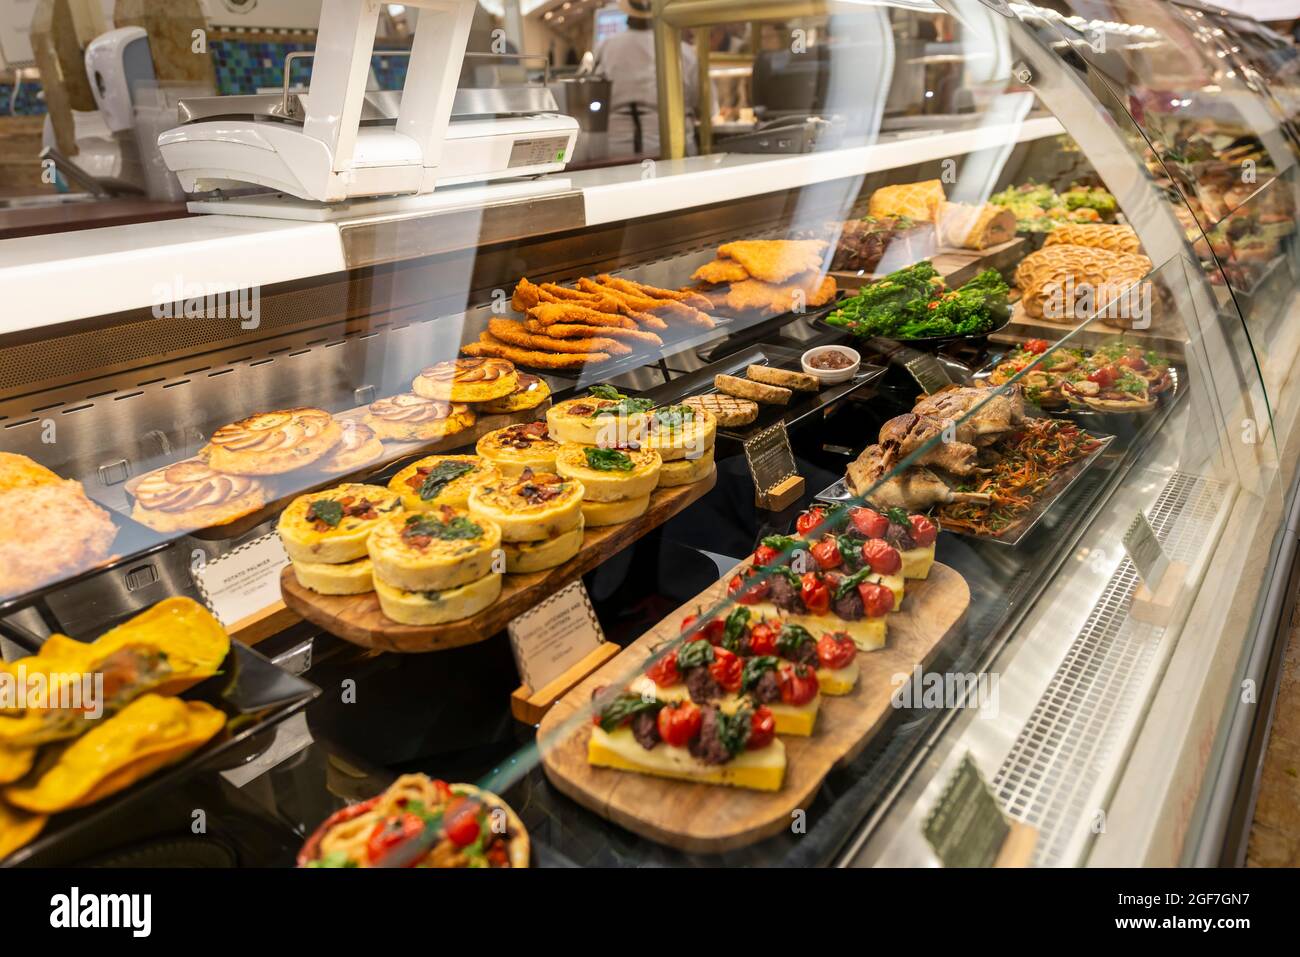 Food in a display, counter in luxury department stores, Harrods, London, England, Great Britain Stock Photo